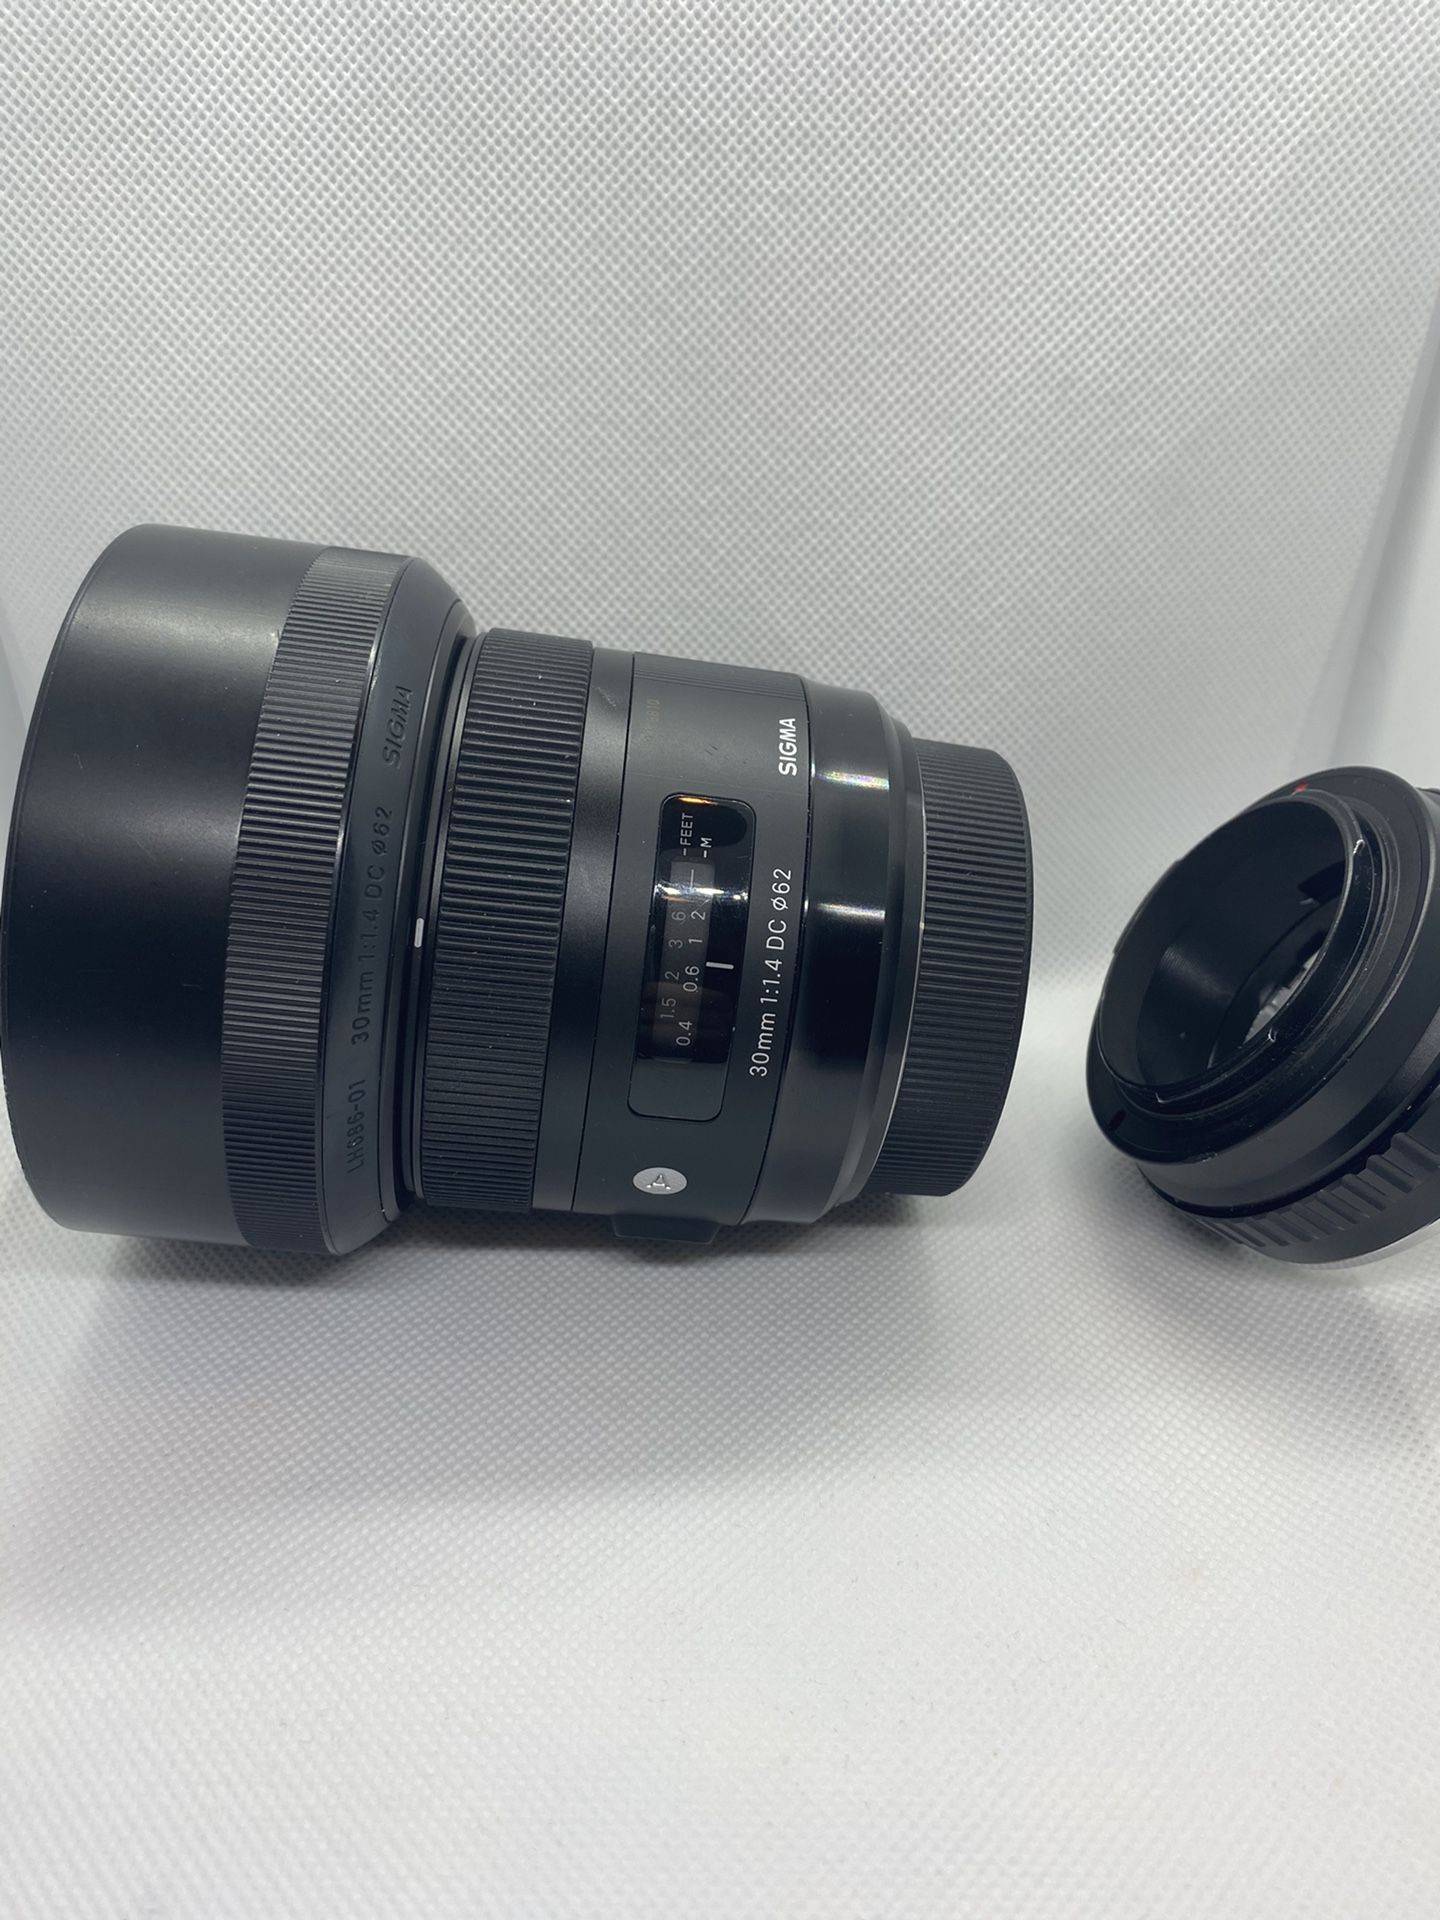 2 Sony lenses (85mm is sold)